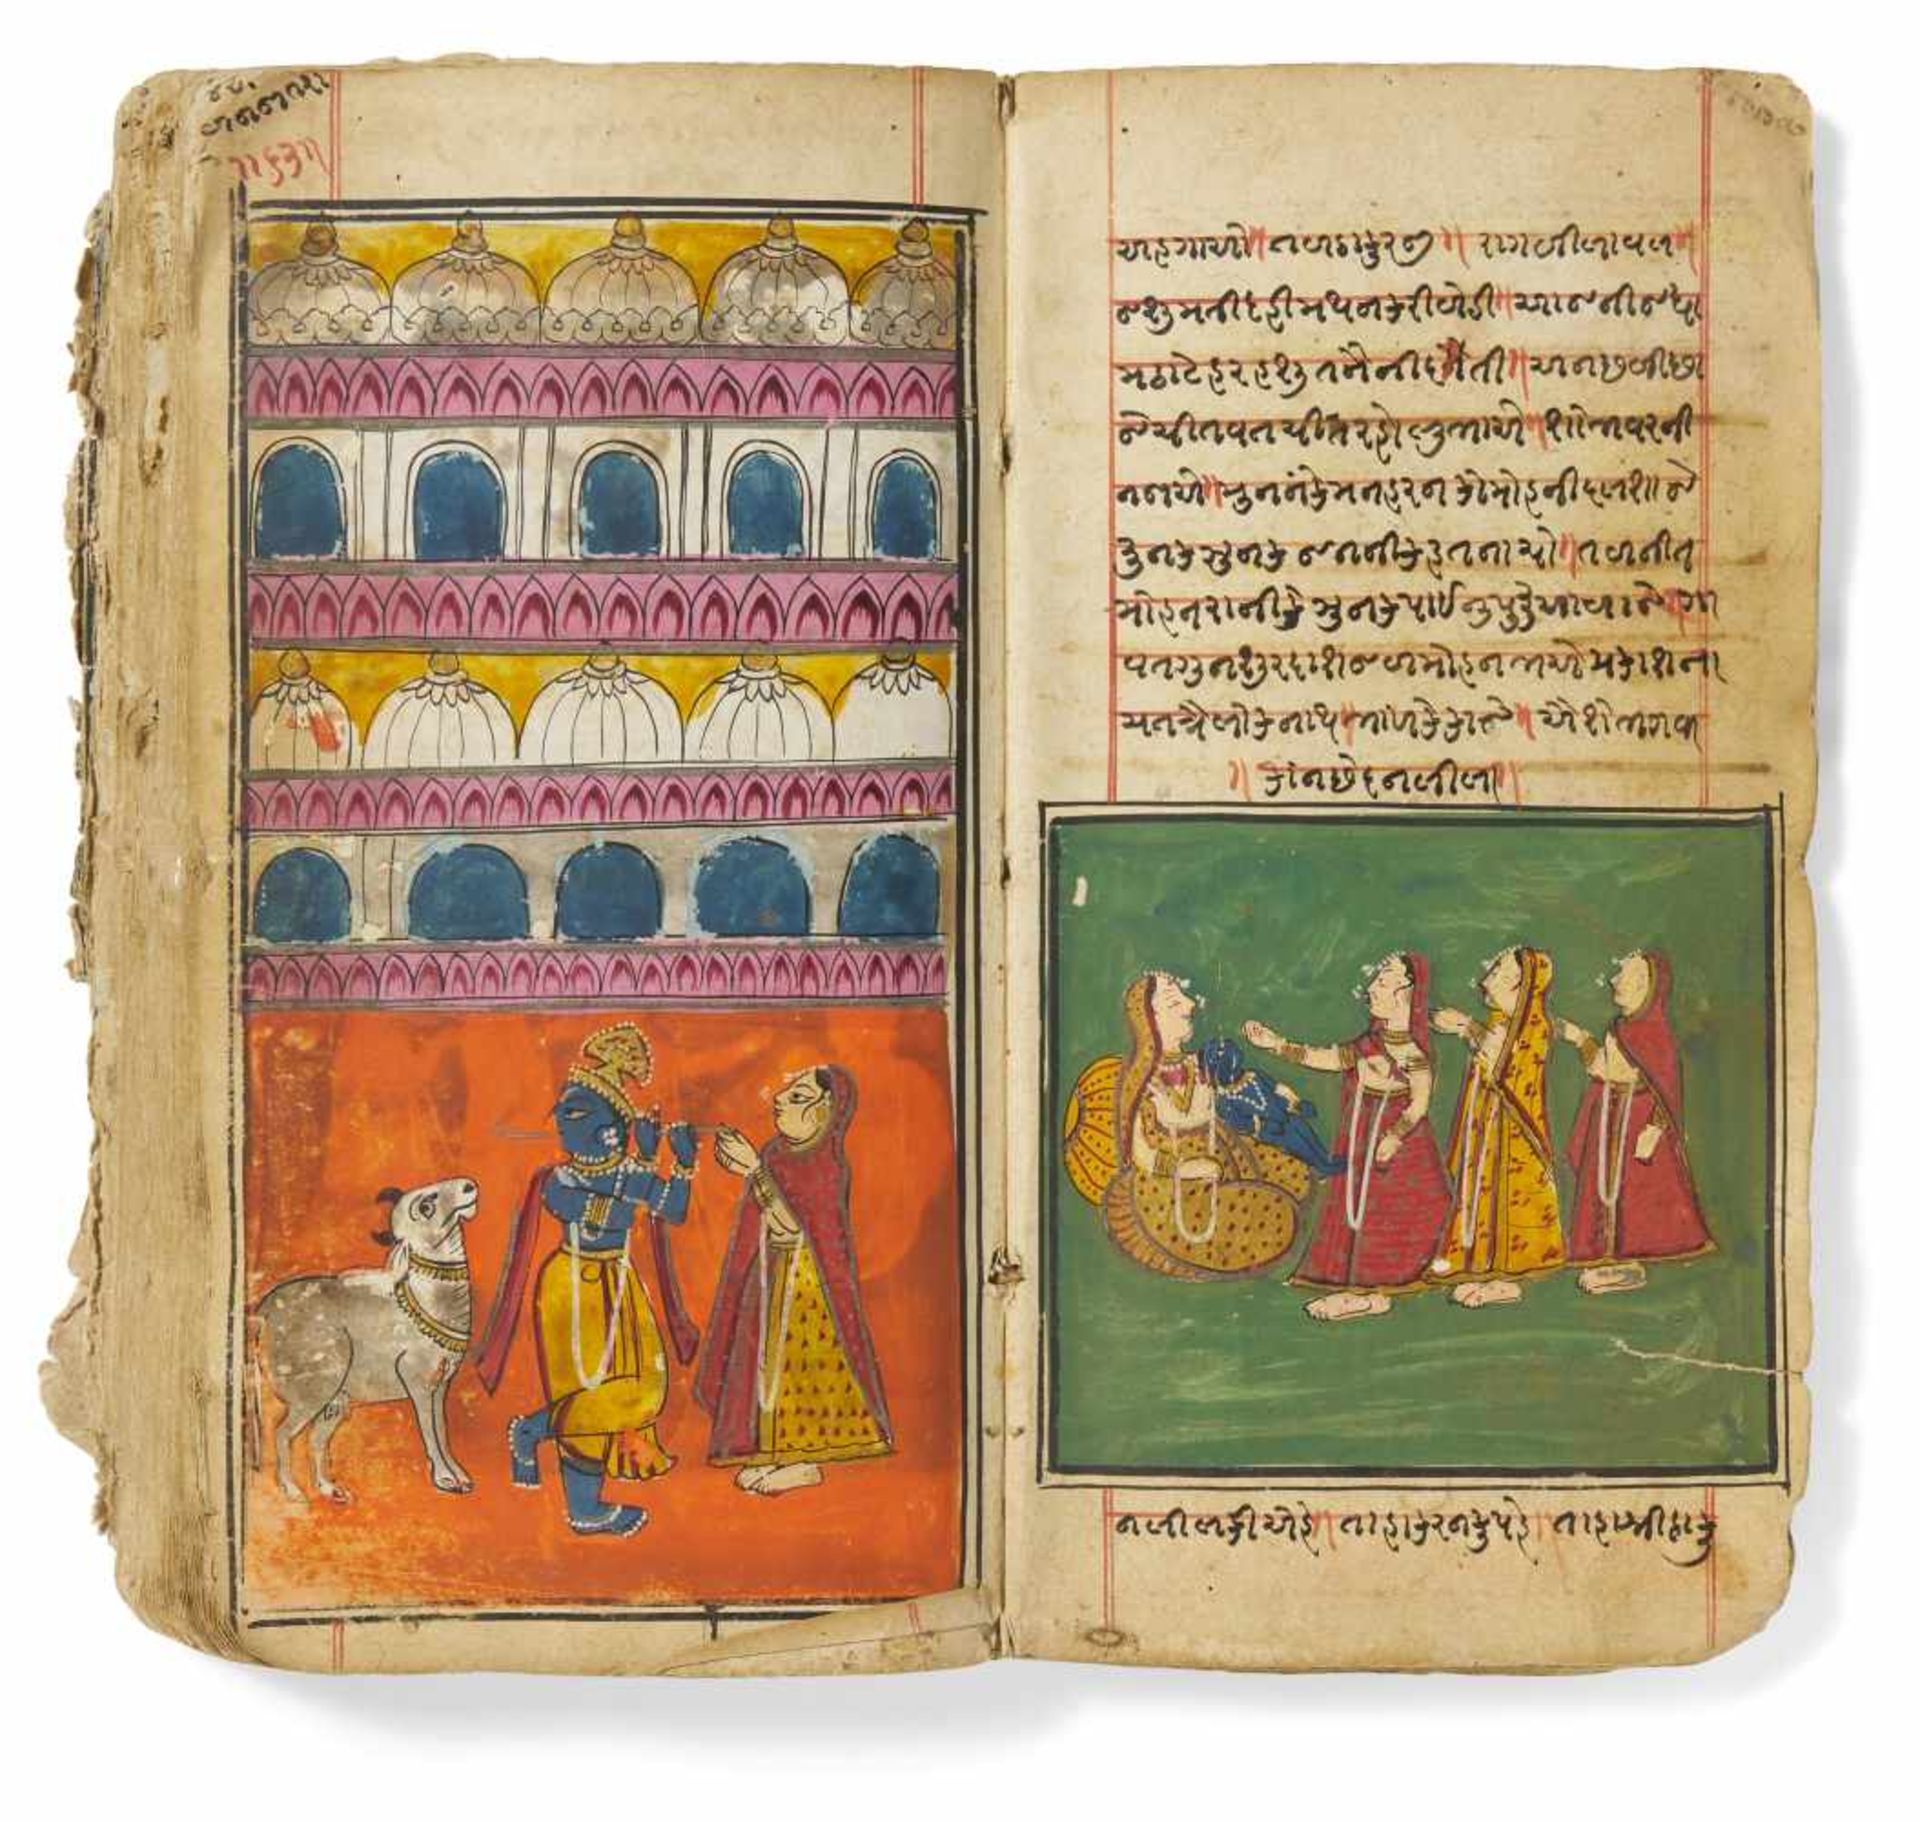 THREE ILLUSTRATED MANUSCRIPTS. India. 18th/19th c. Ink, pigments, partly with gold leaf on paper. a)